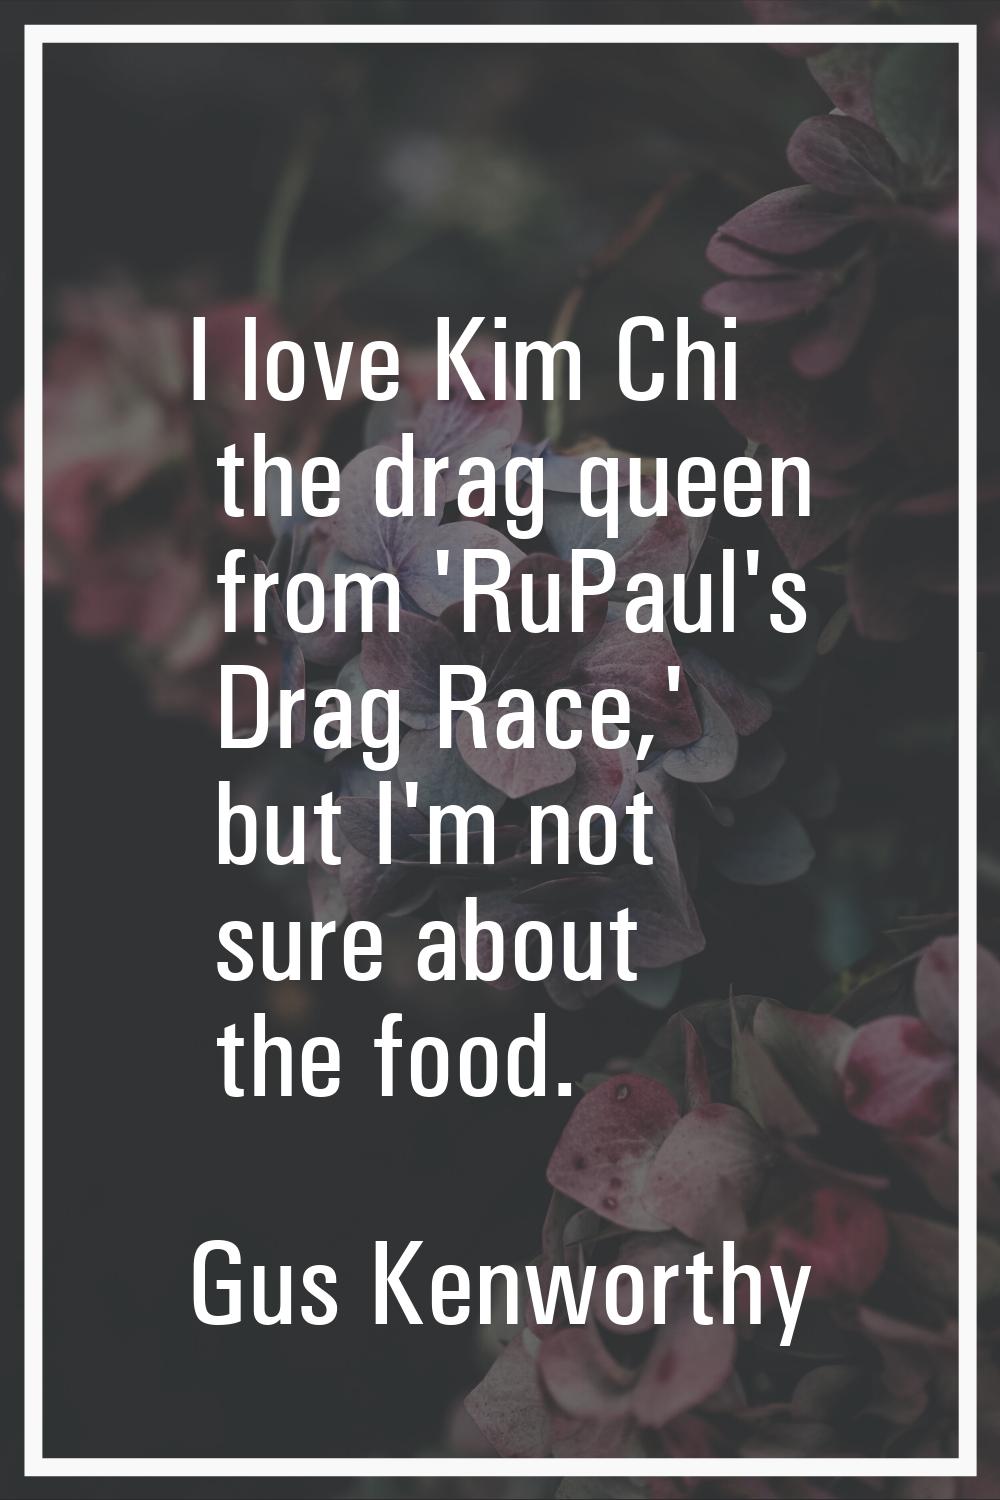 I love Kim Chi the drag queen from 'RuPaul's Drag Race,' but I'm not sure about the food.